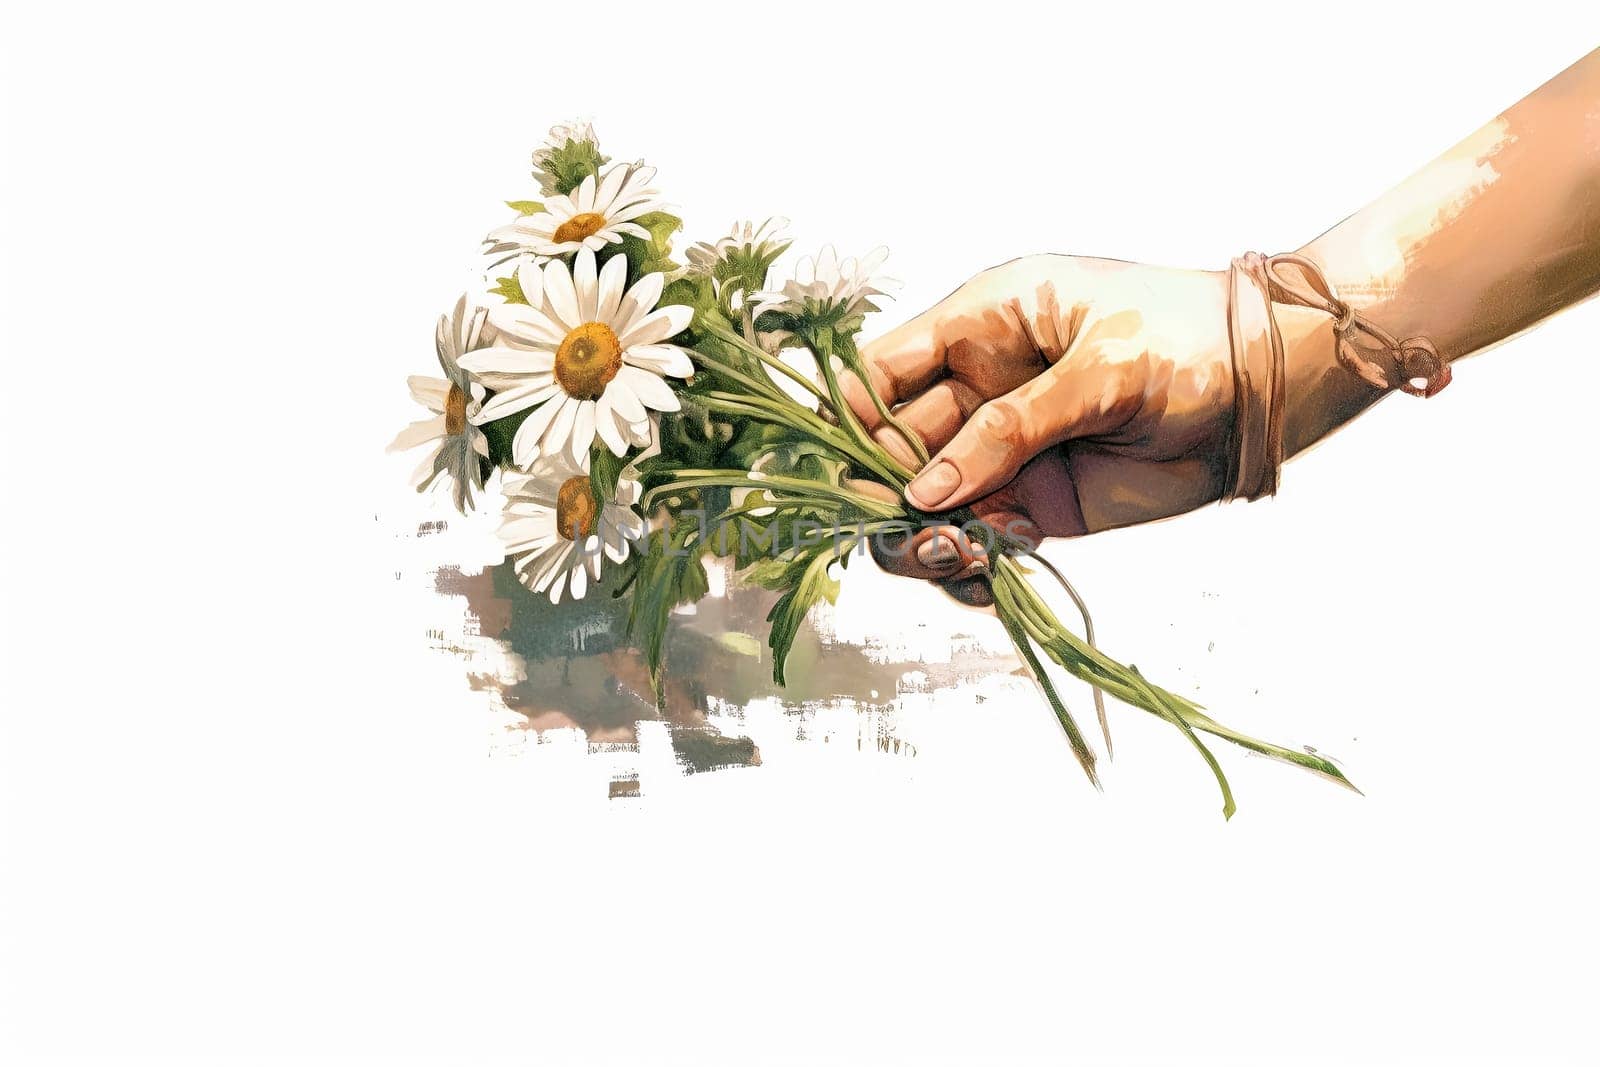 A hand holding a bouquet of white flowers. The flowers are daisies and the hand is wearing a bracelet. Concept of warmth and affection, as the person is holding the flowers for someone special